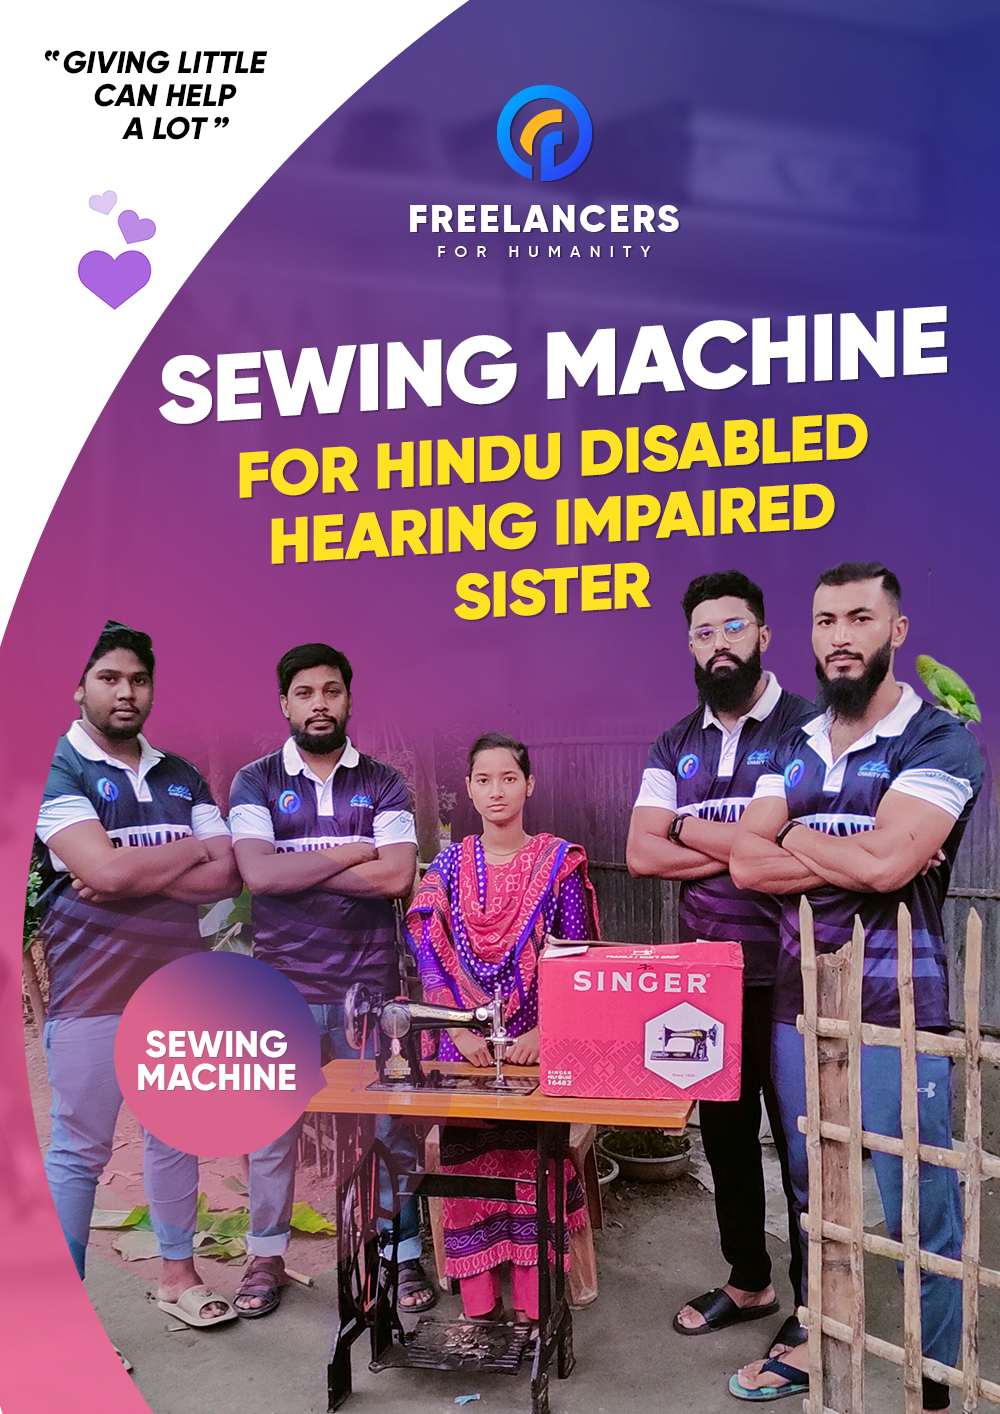 f4u_Sewing-Machine-for-Hindu-Disabled-Hearing-Impaired-Sister